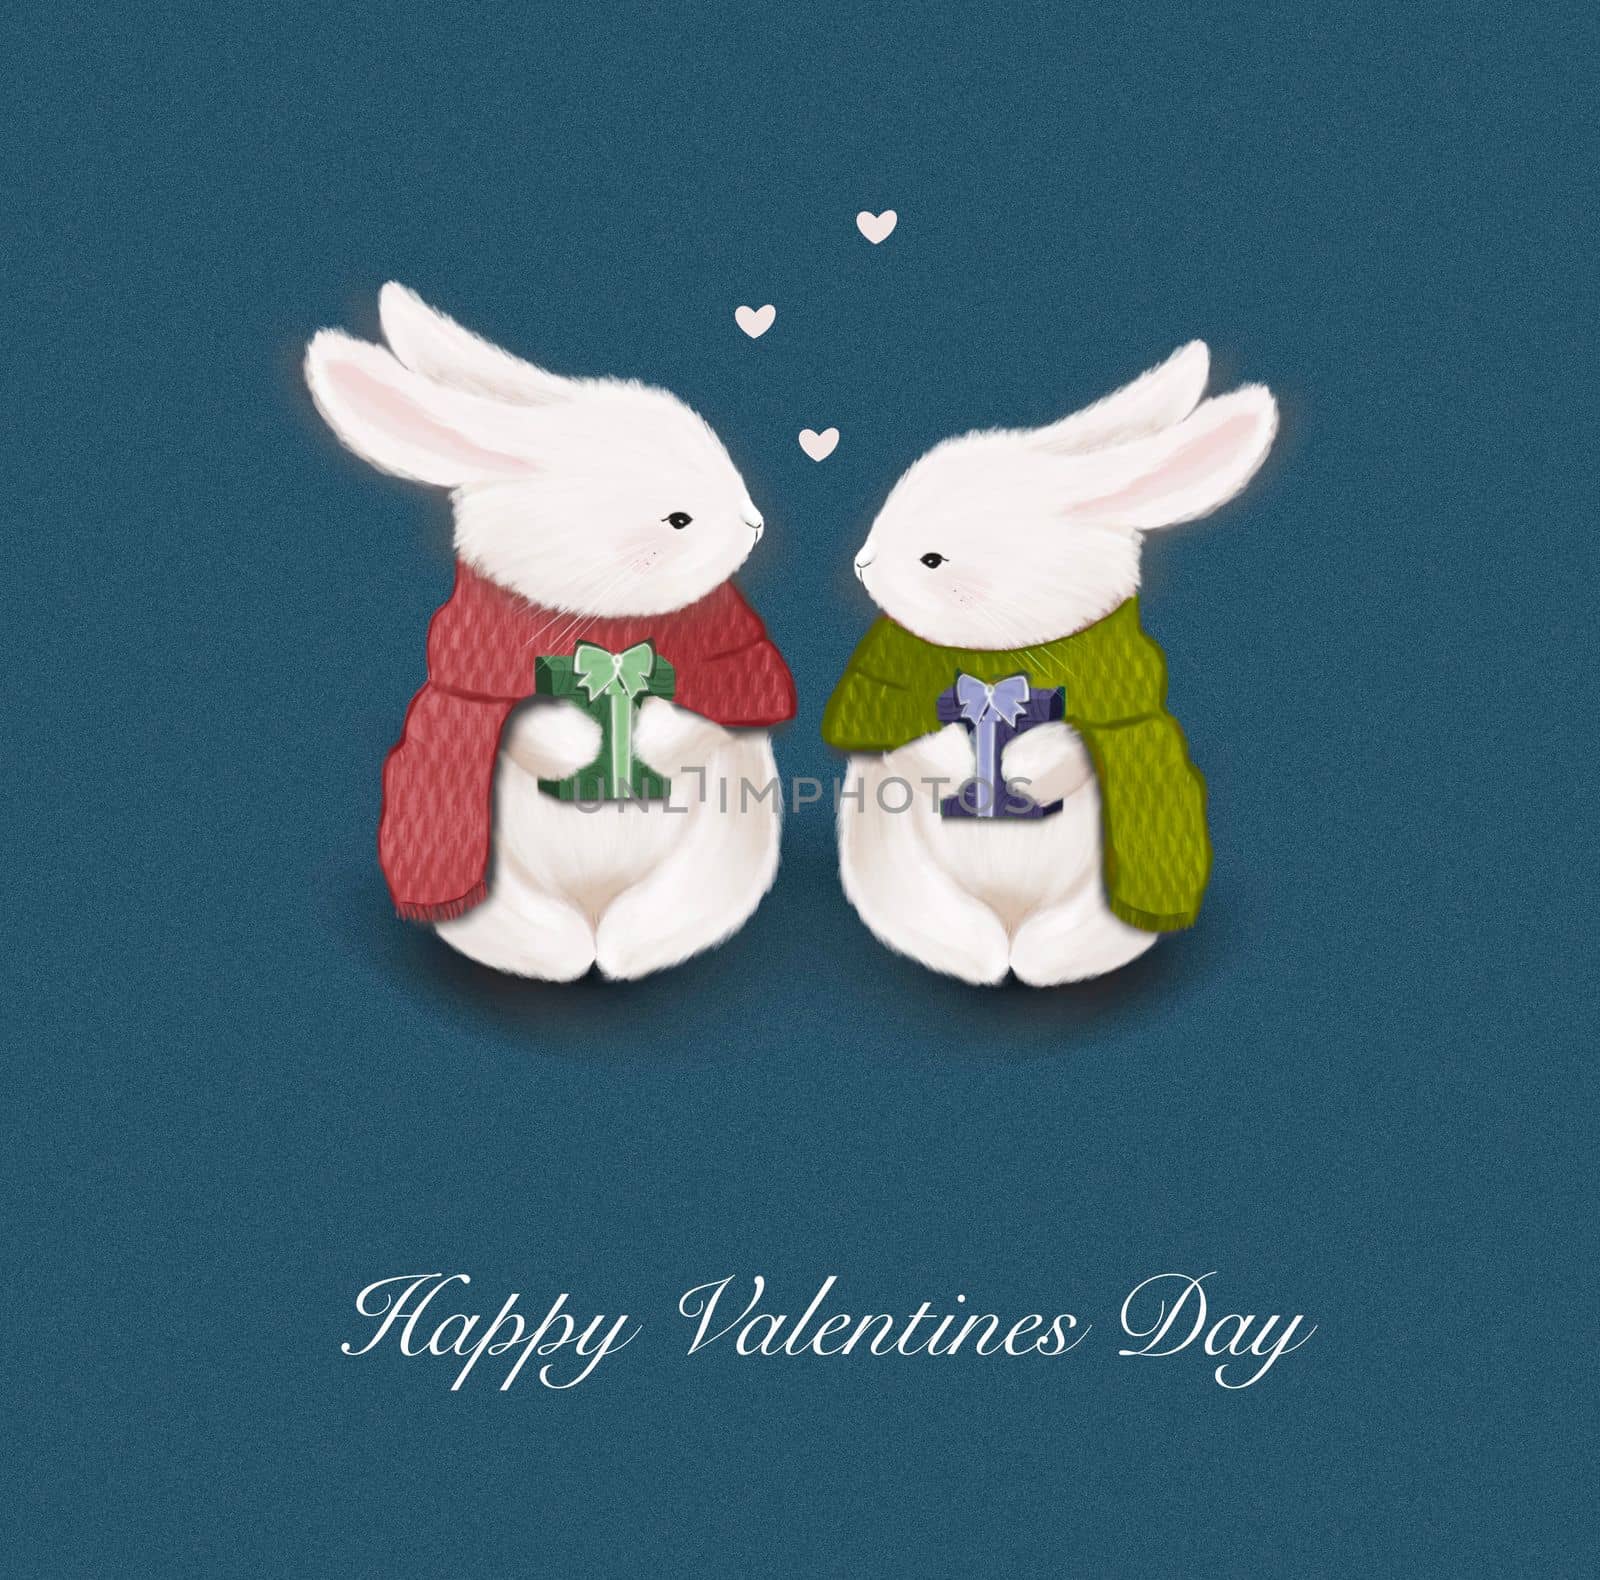 A postcard with cute rabbits for Valentine's Day